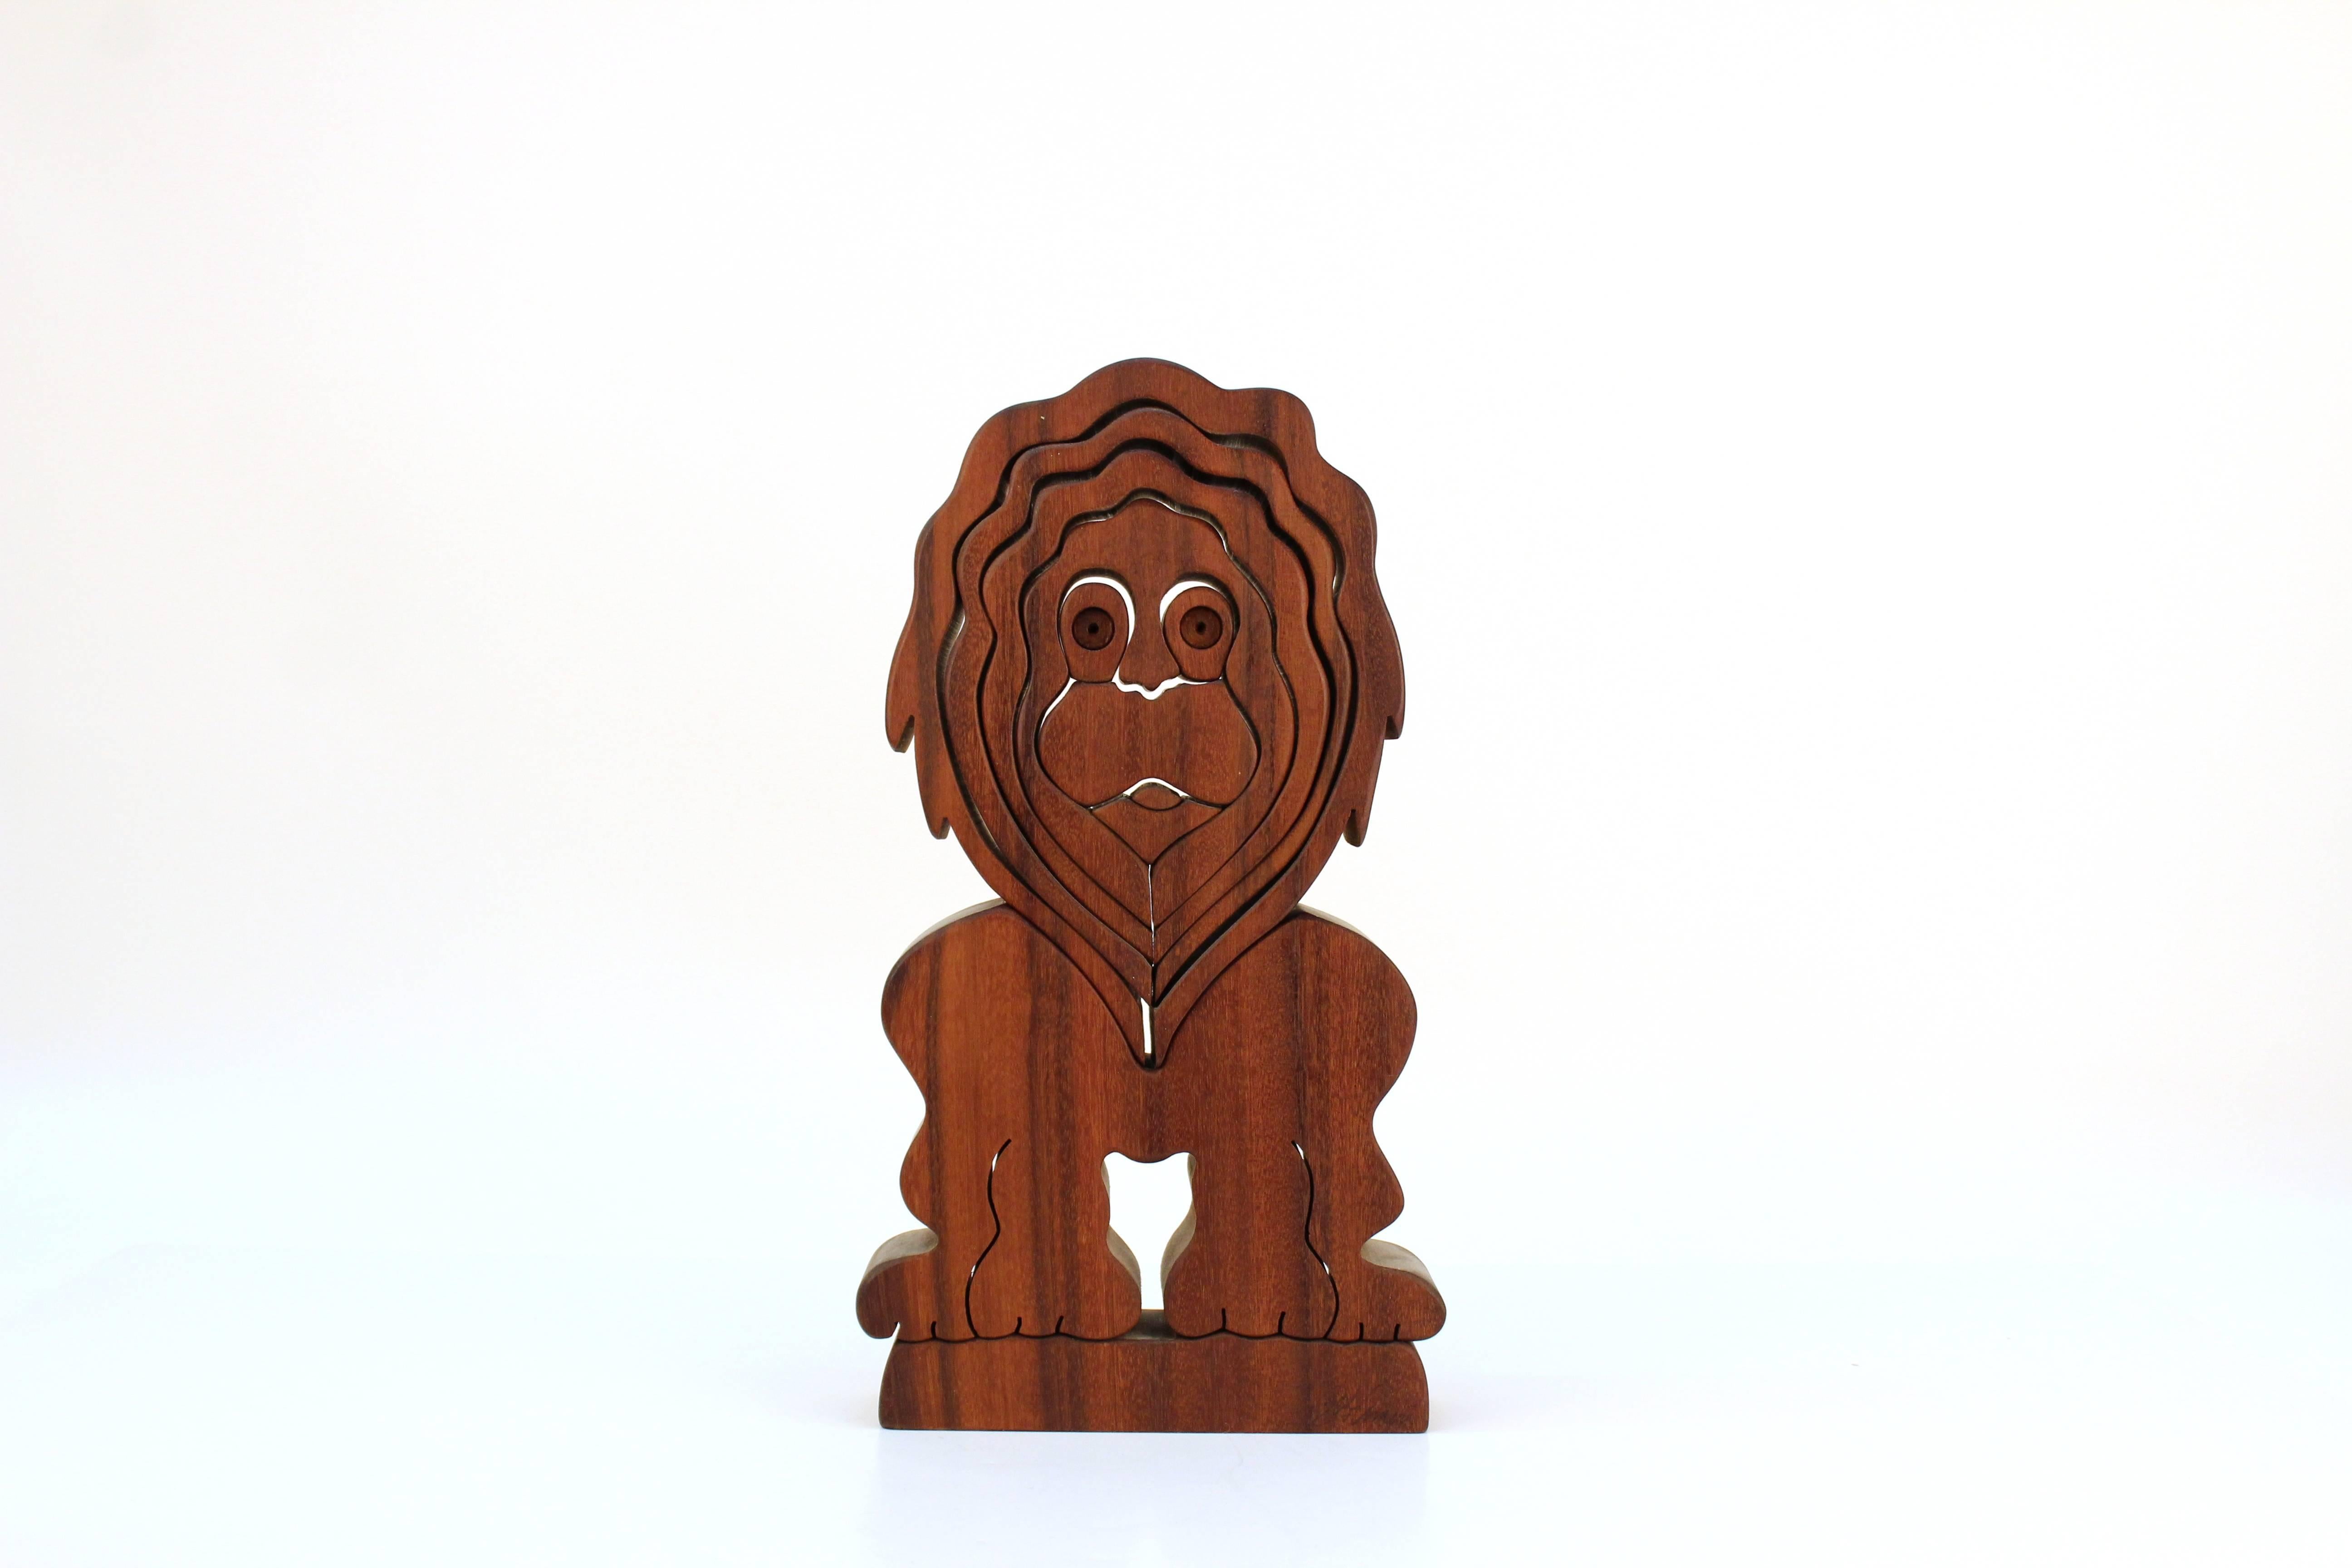 A wooden puzzle sculpture in the form of caricature lion by Bob Ameri. Made in rich dark wood, the sculpture comes completely apart for fun. Signed on base.

110487.